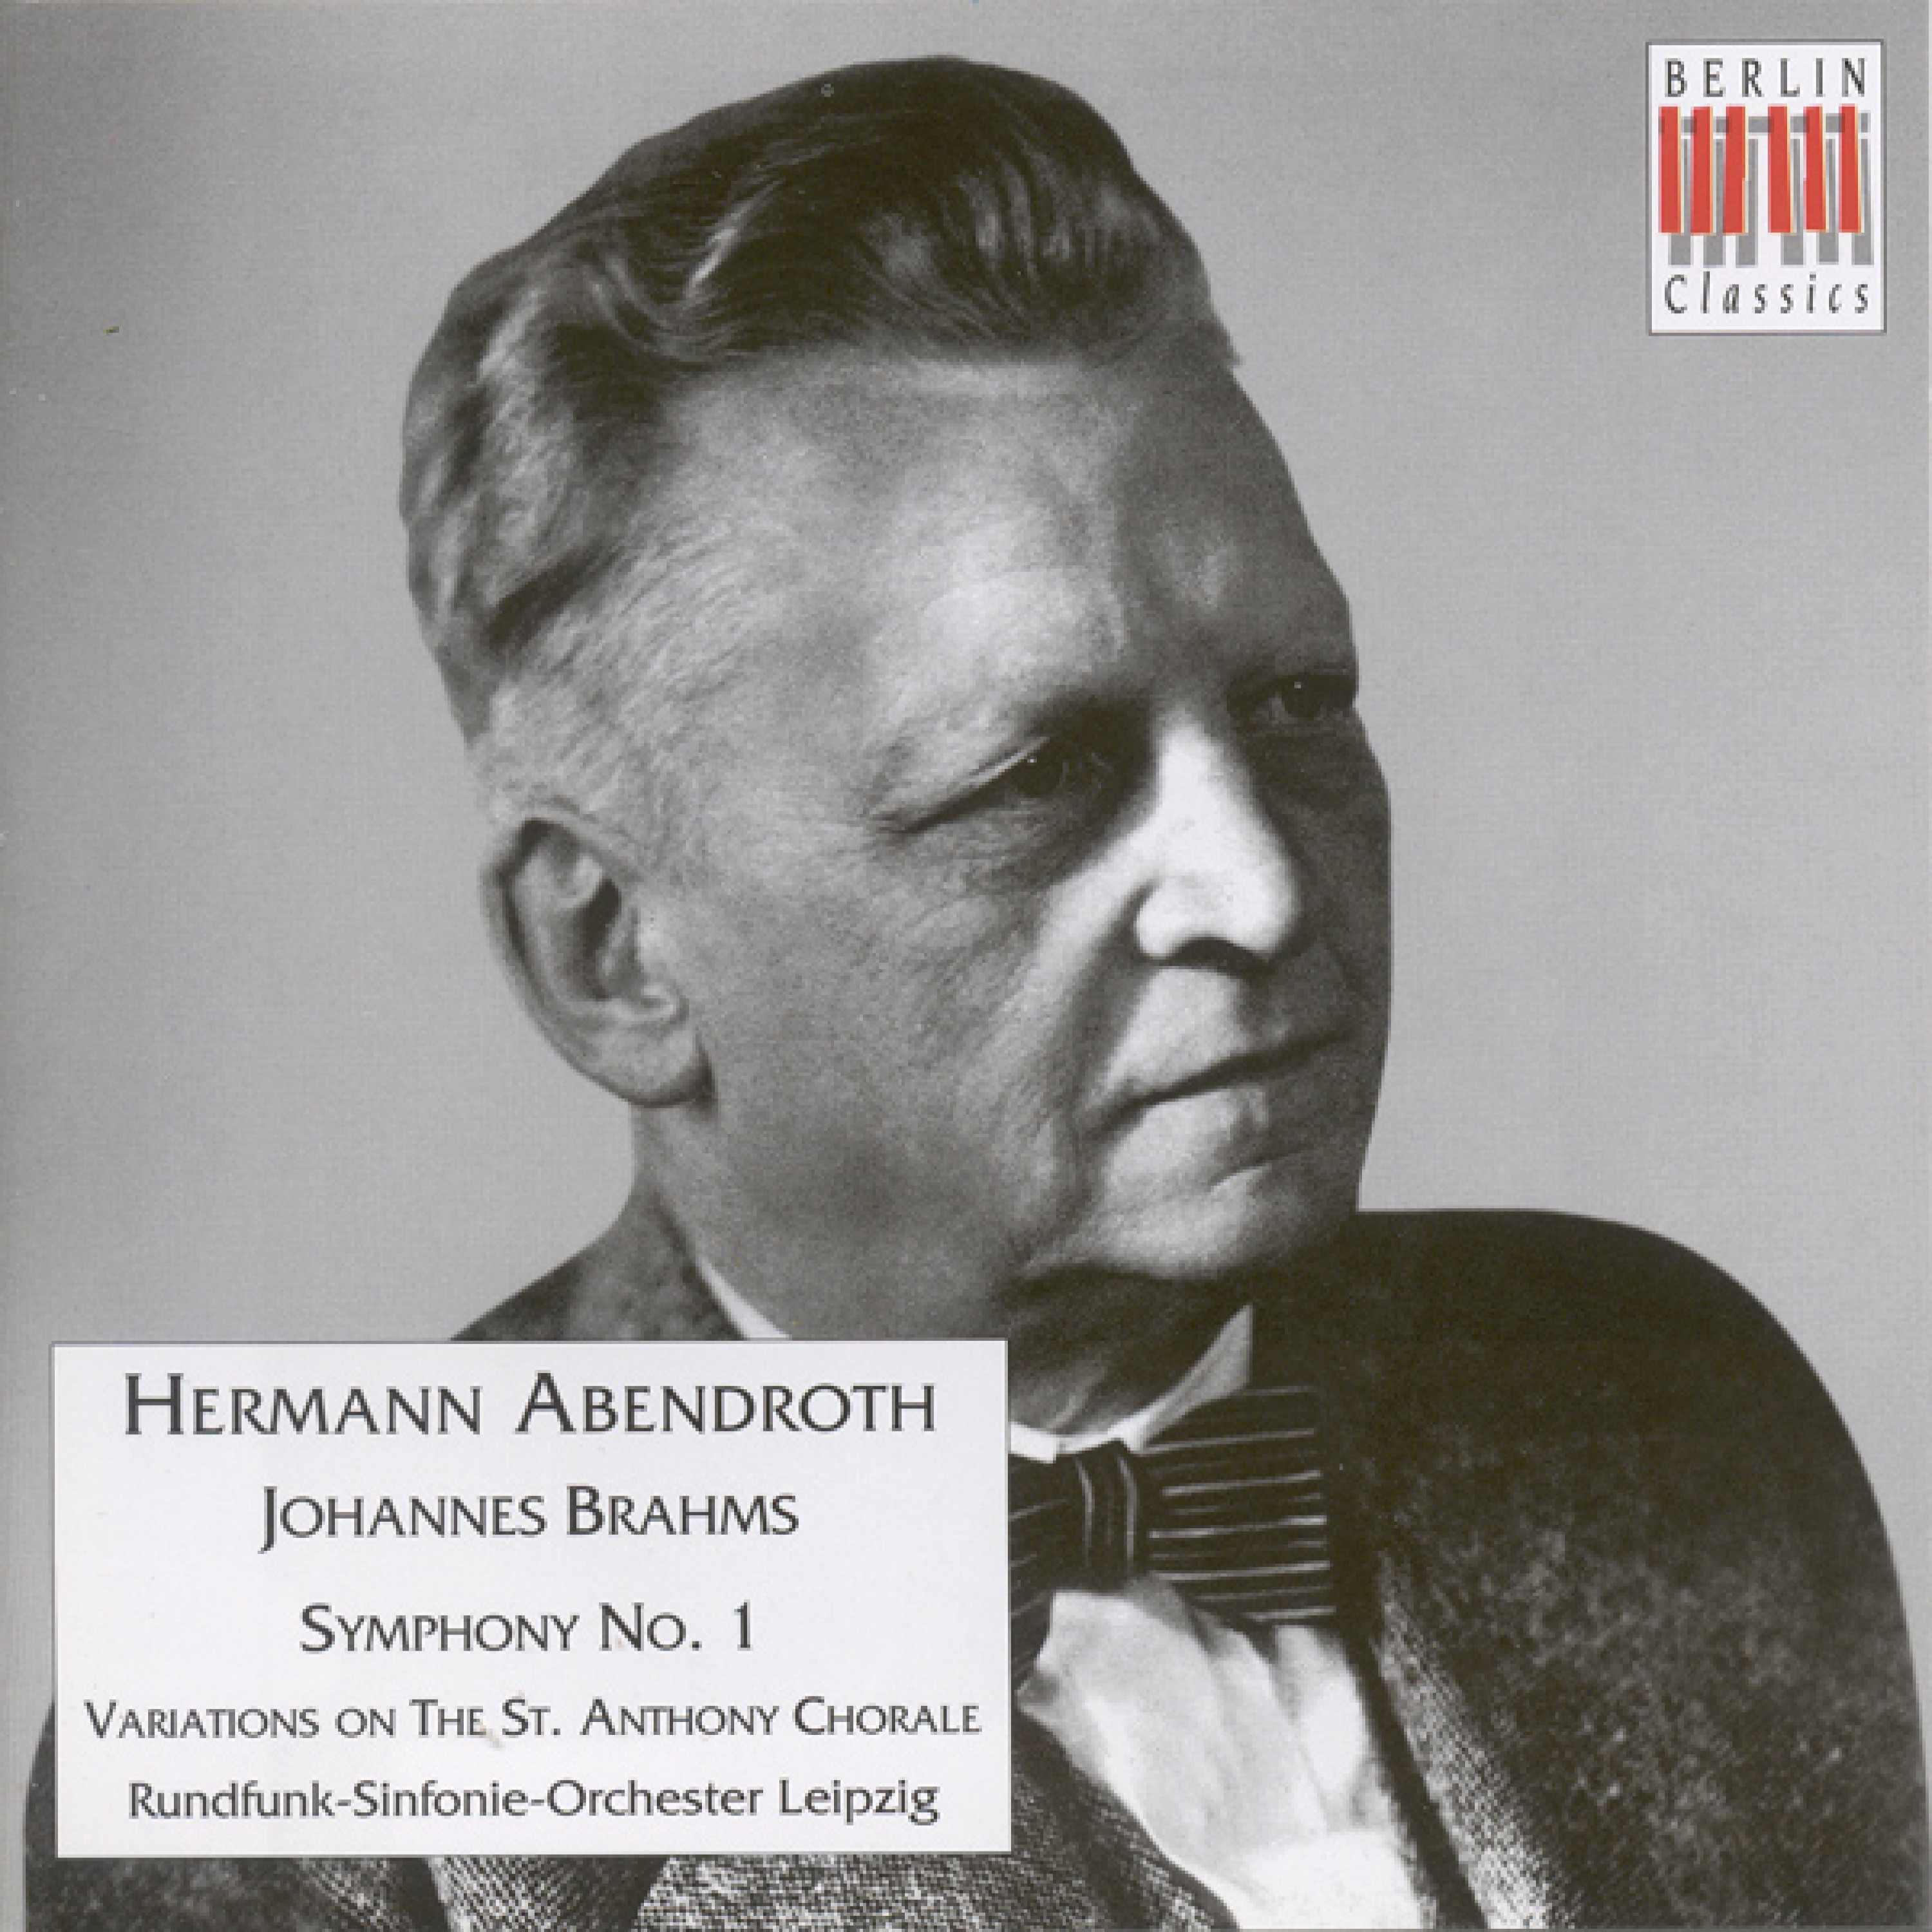 Variations on a Theme by Haydn, Op. 56a, "St. Anthony Variations": Variation 3: Con moto